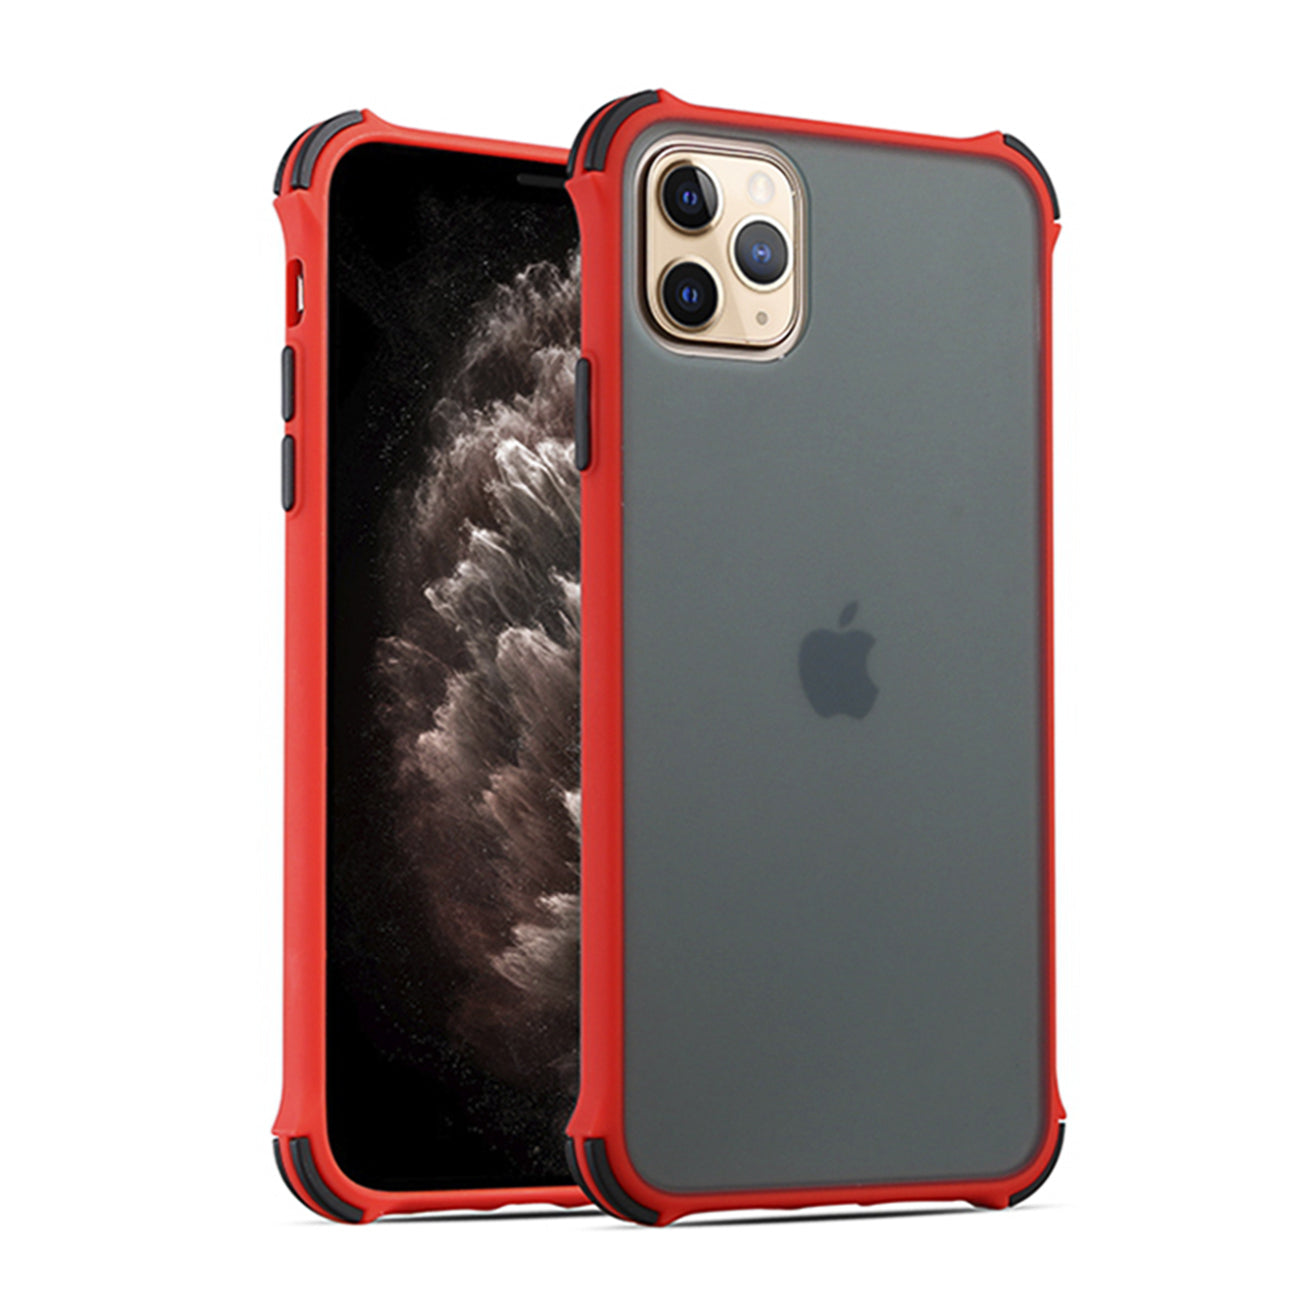 Bumper Case For APPLE IPHONE 11 PRO In Red